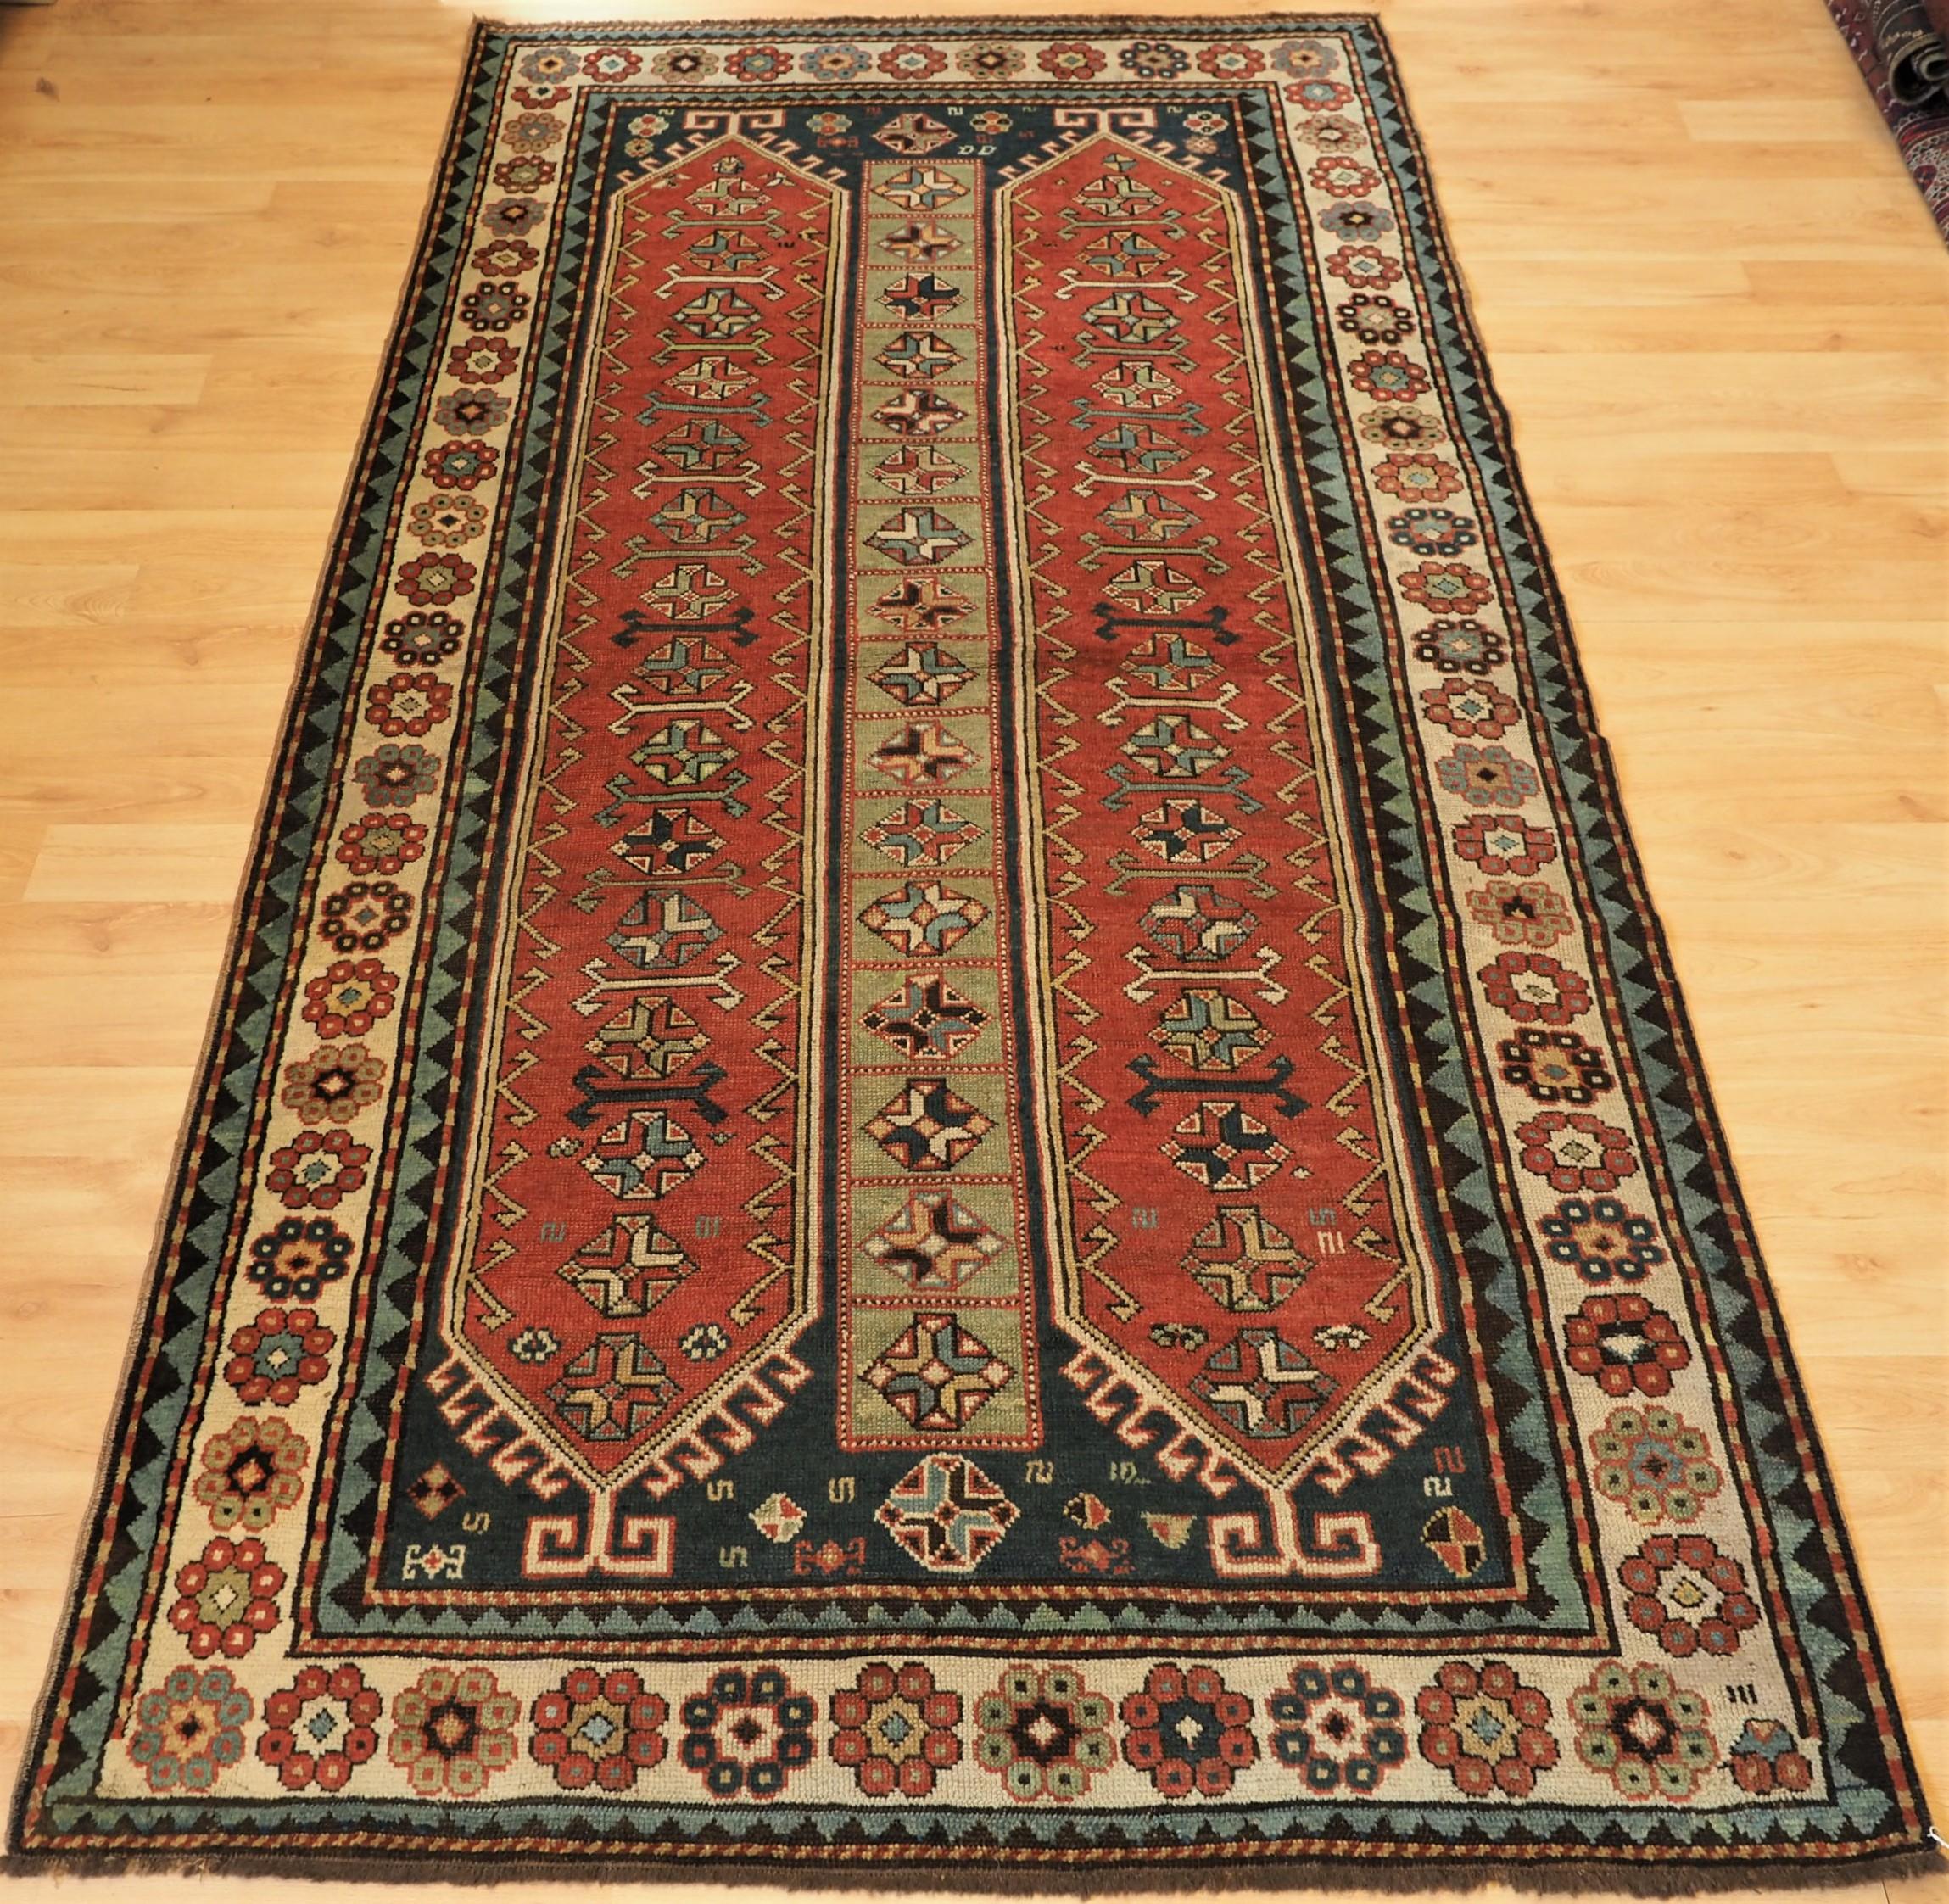 
Size: 8ft 6in x 4ft 6in (259 x 137cm).

Antique South Caucasian Kazak with two elongated latch hook medallions.

Circa 1890.

A superb example of a South Caucasian Kazak rug. Two long latch hook medallion in a soft terracotta on a dark indigo blue